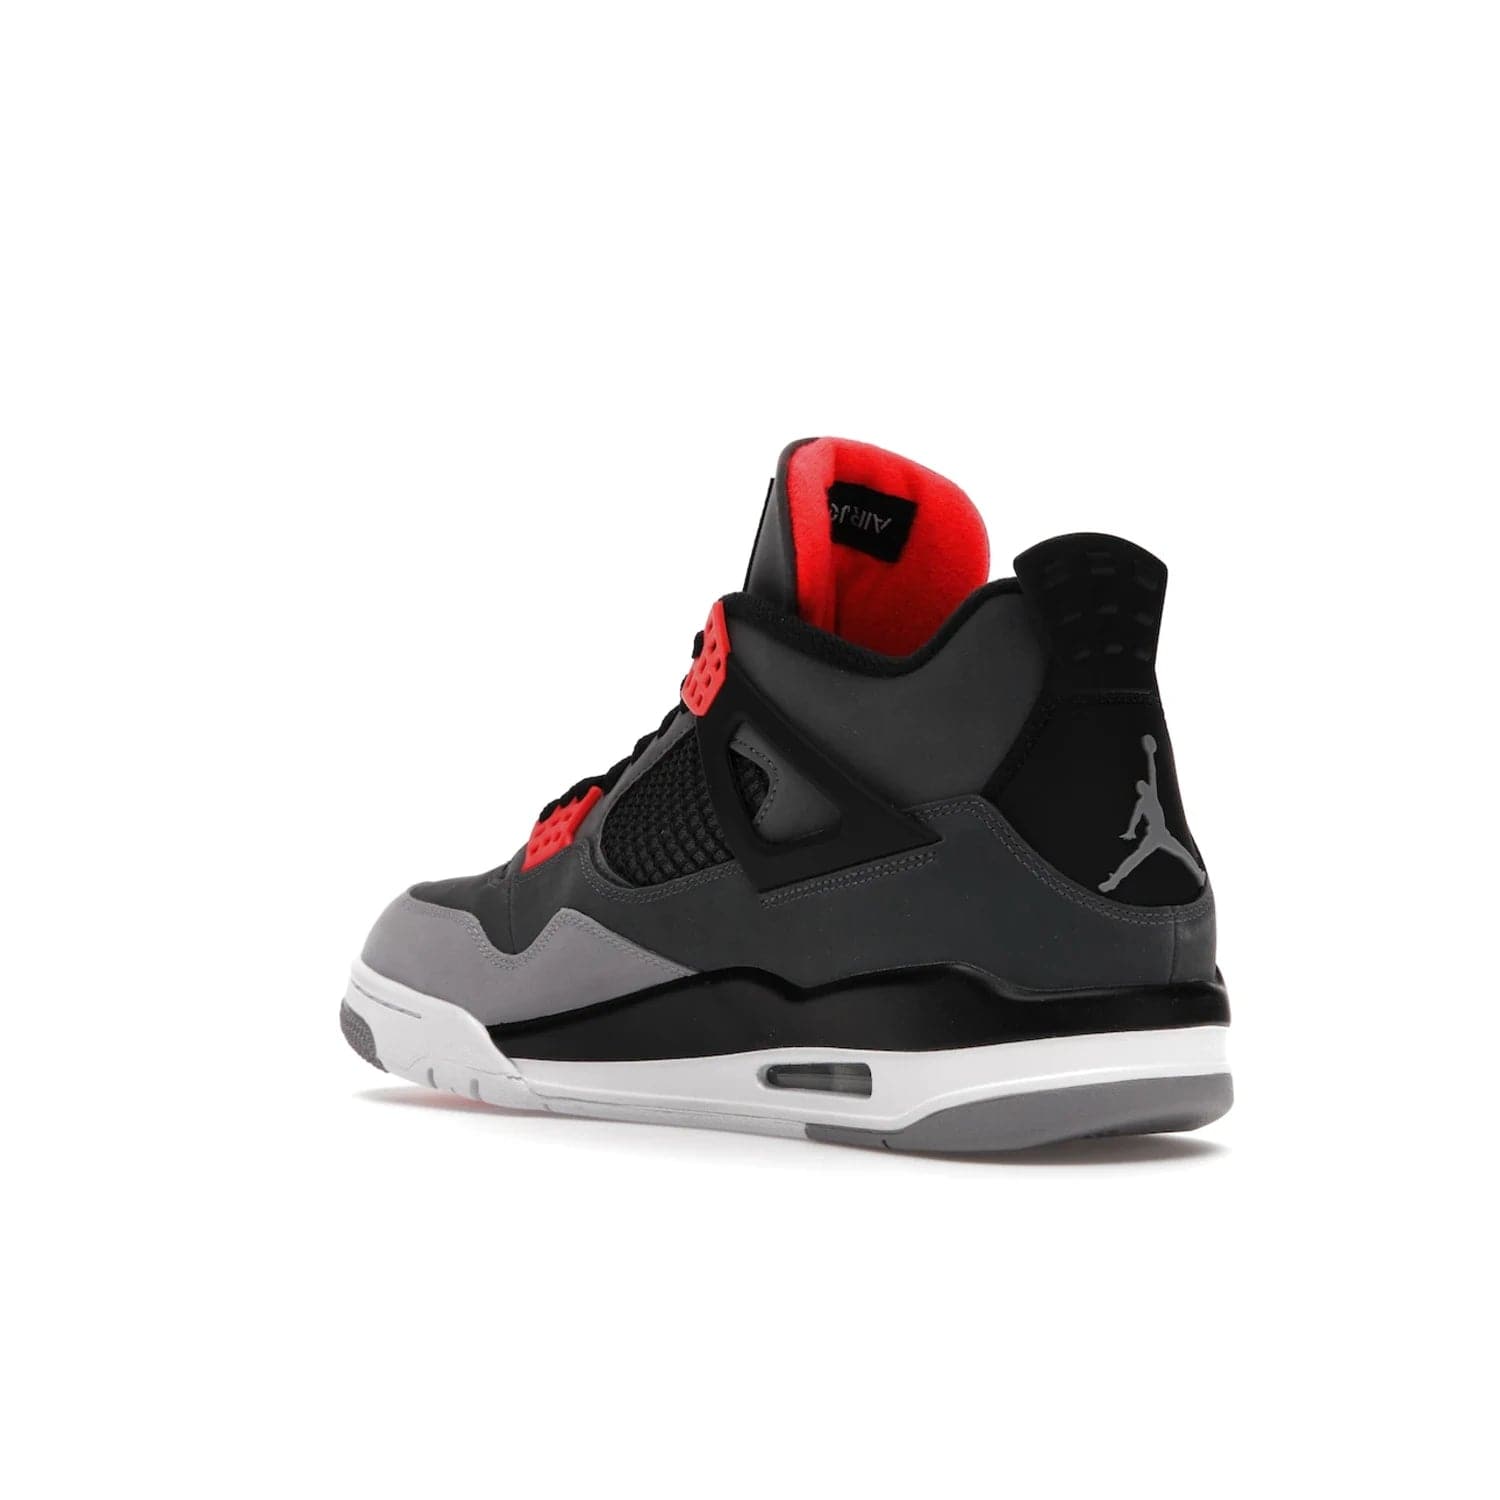 Jordan 4 Retro Infrared - Image 24 - Only at www.BallersClubKickz.com - Introducing the classic & timeless Air Jordan 4 Infrared. Durabuck upper, TPU mesh inserts, tech straps & heel tabs in dark grey and infrared accents. White sole with visible Air units. Out June 15, 2022. Get your pair now!